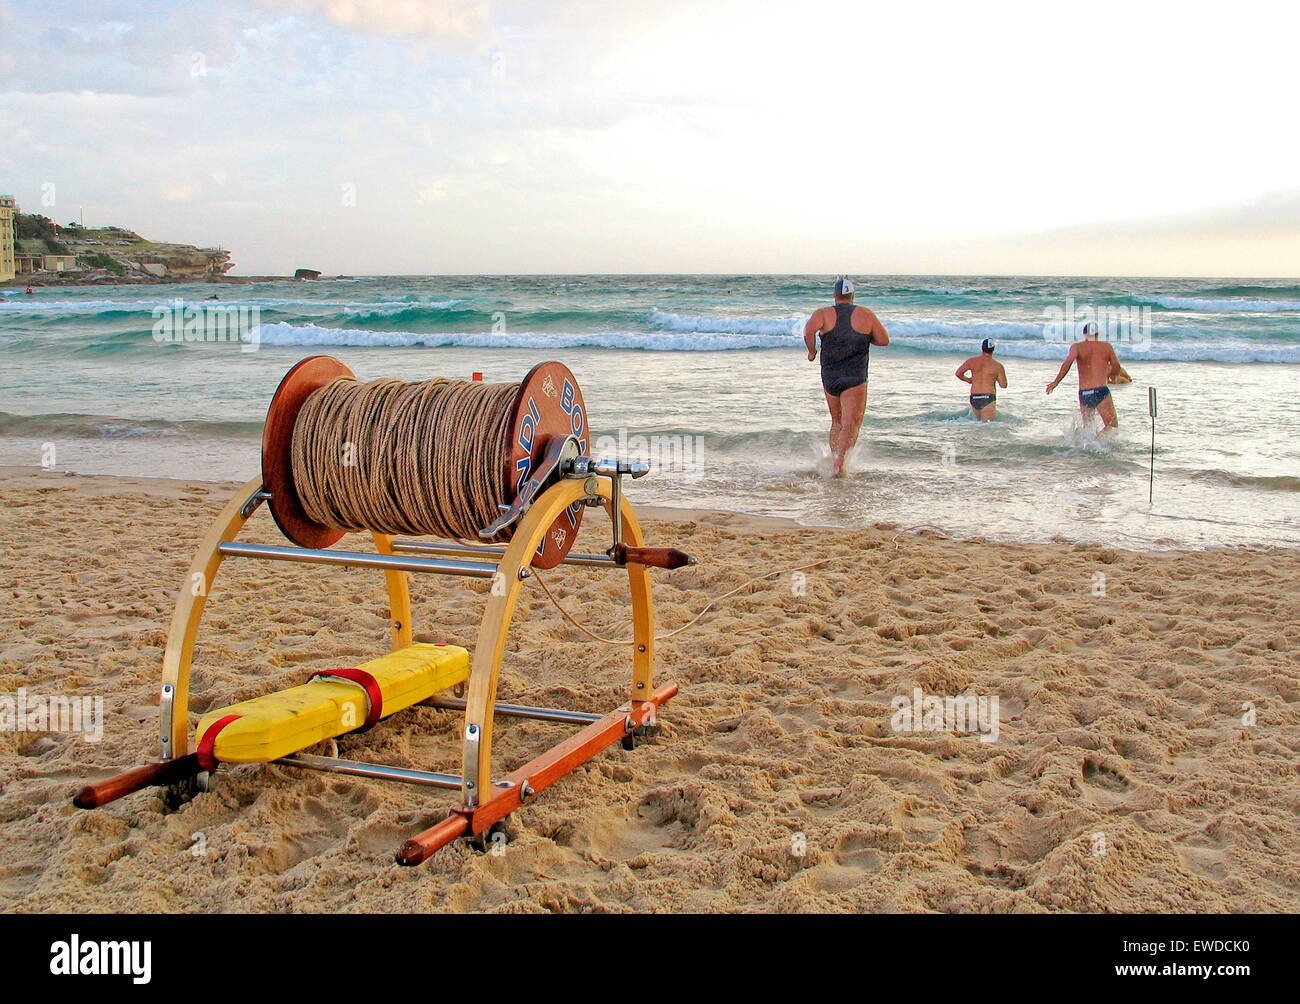 Surf life saving team in a training session at Bondi Beach in preparation of a surf carnival. Stock Photo